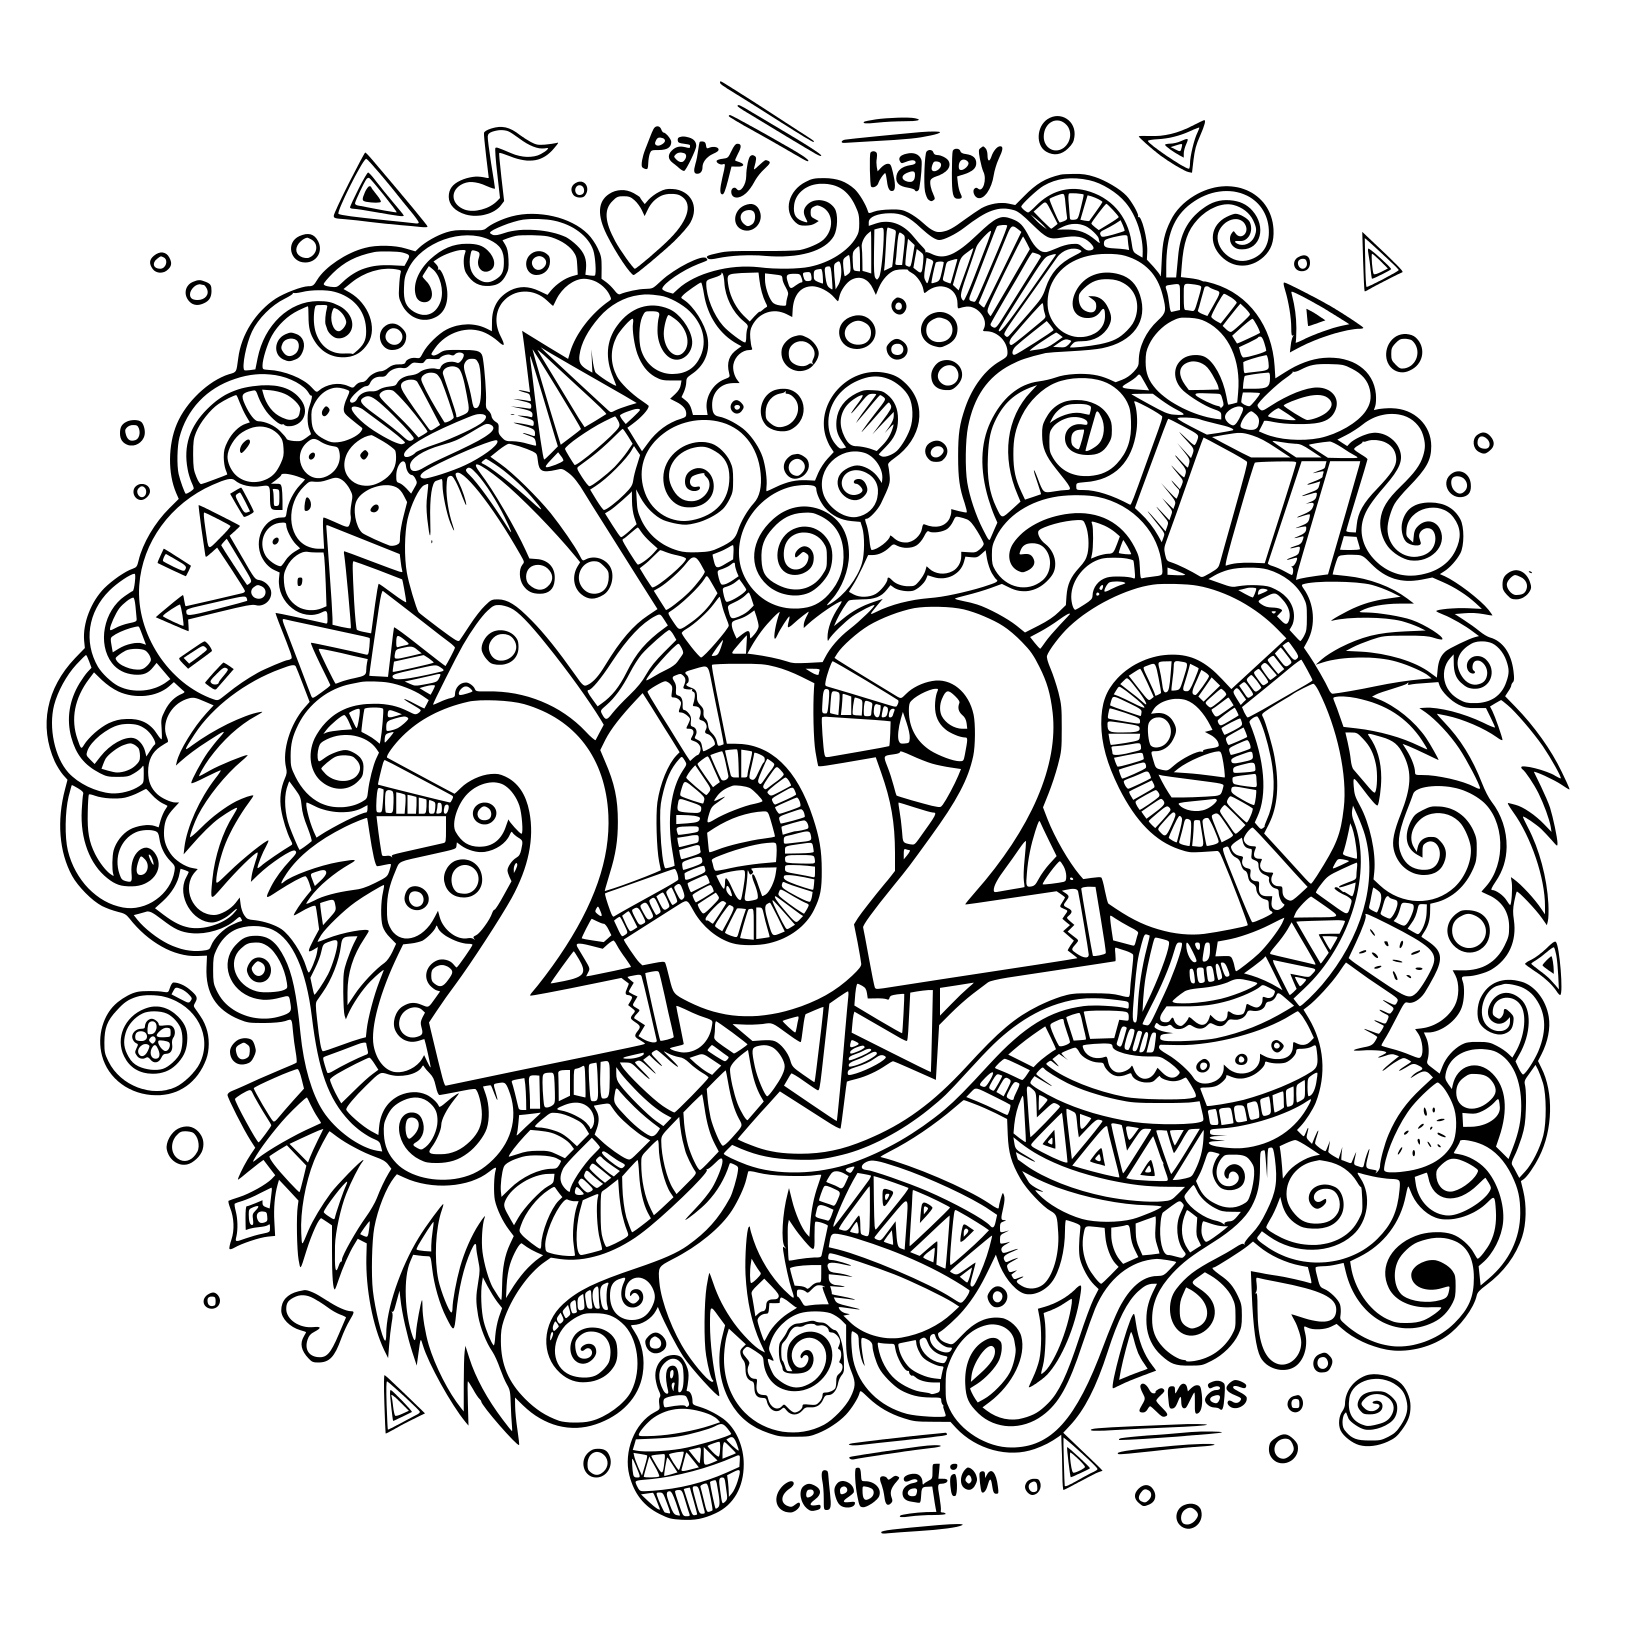 New Year 2020 Doodles Objects And Elements Poster Design Coloring Page